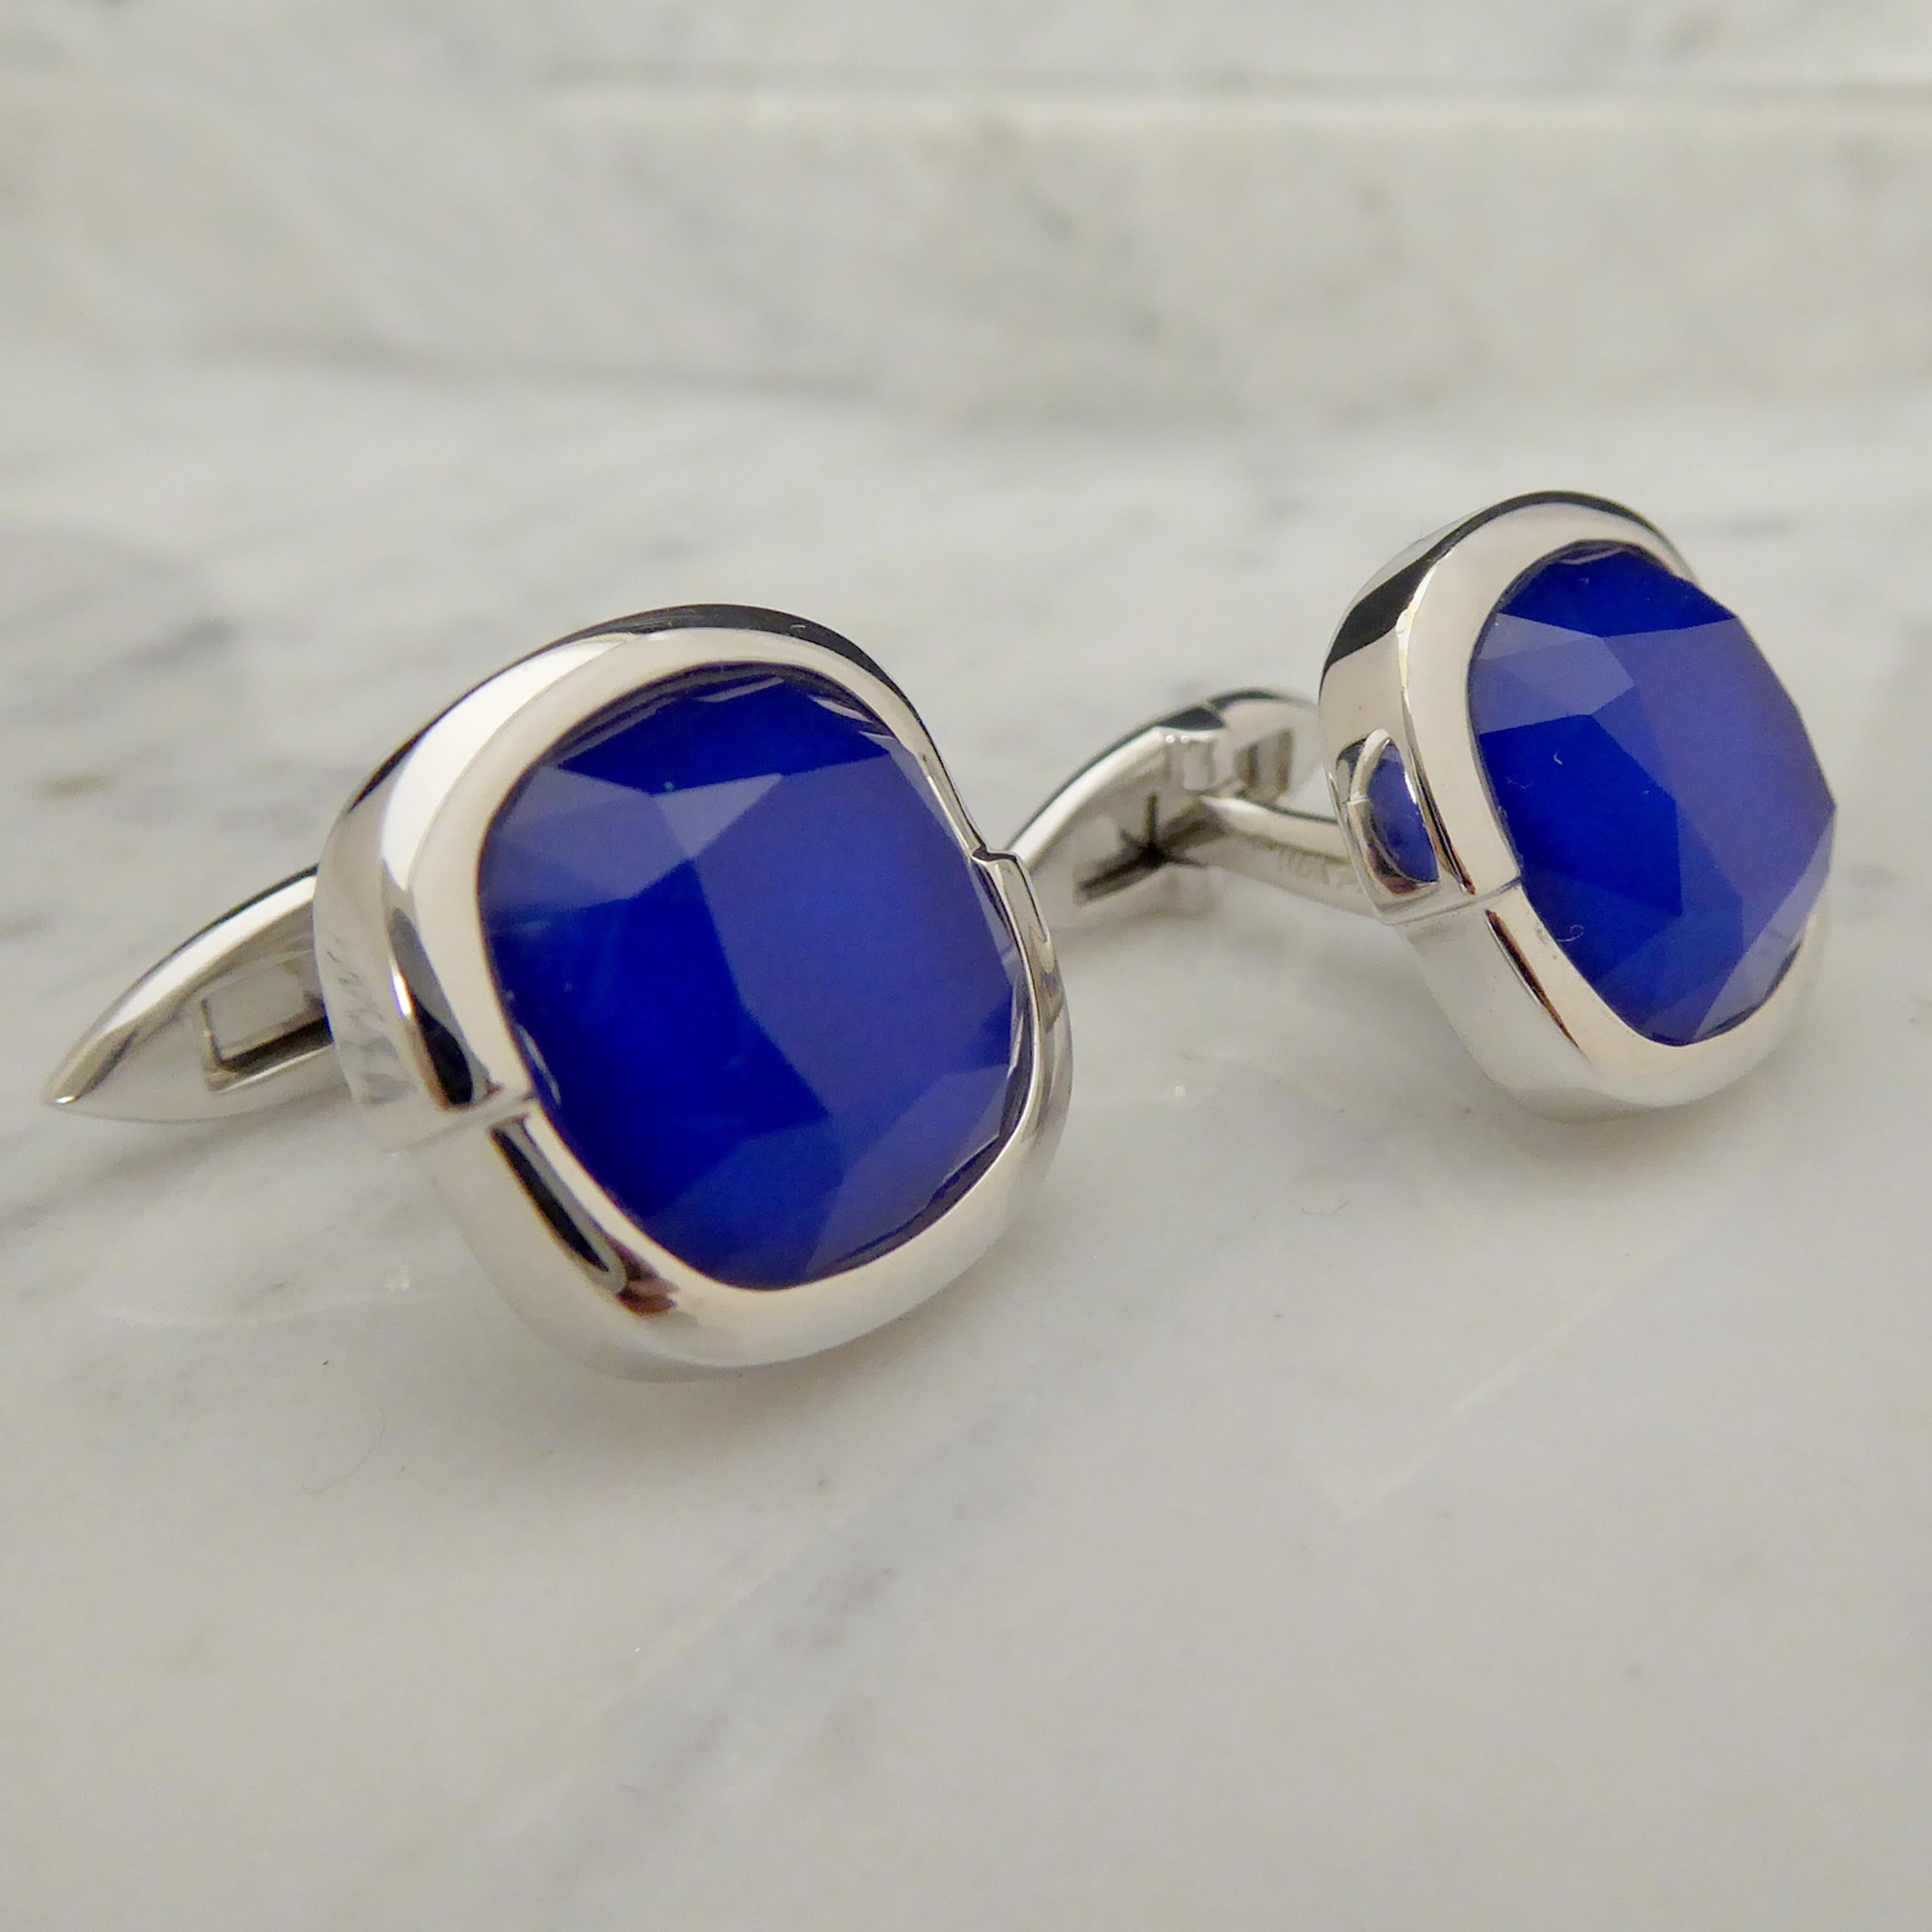 A very handsome pair of 18ct white gold and blue quartz cufflinks from the renowned celebrity jewellery designer, Stephen Webster.  Created with a cobalt blue cushion shaped quartz set within a polished white panel of two halves set slightly one